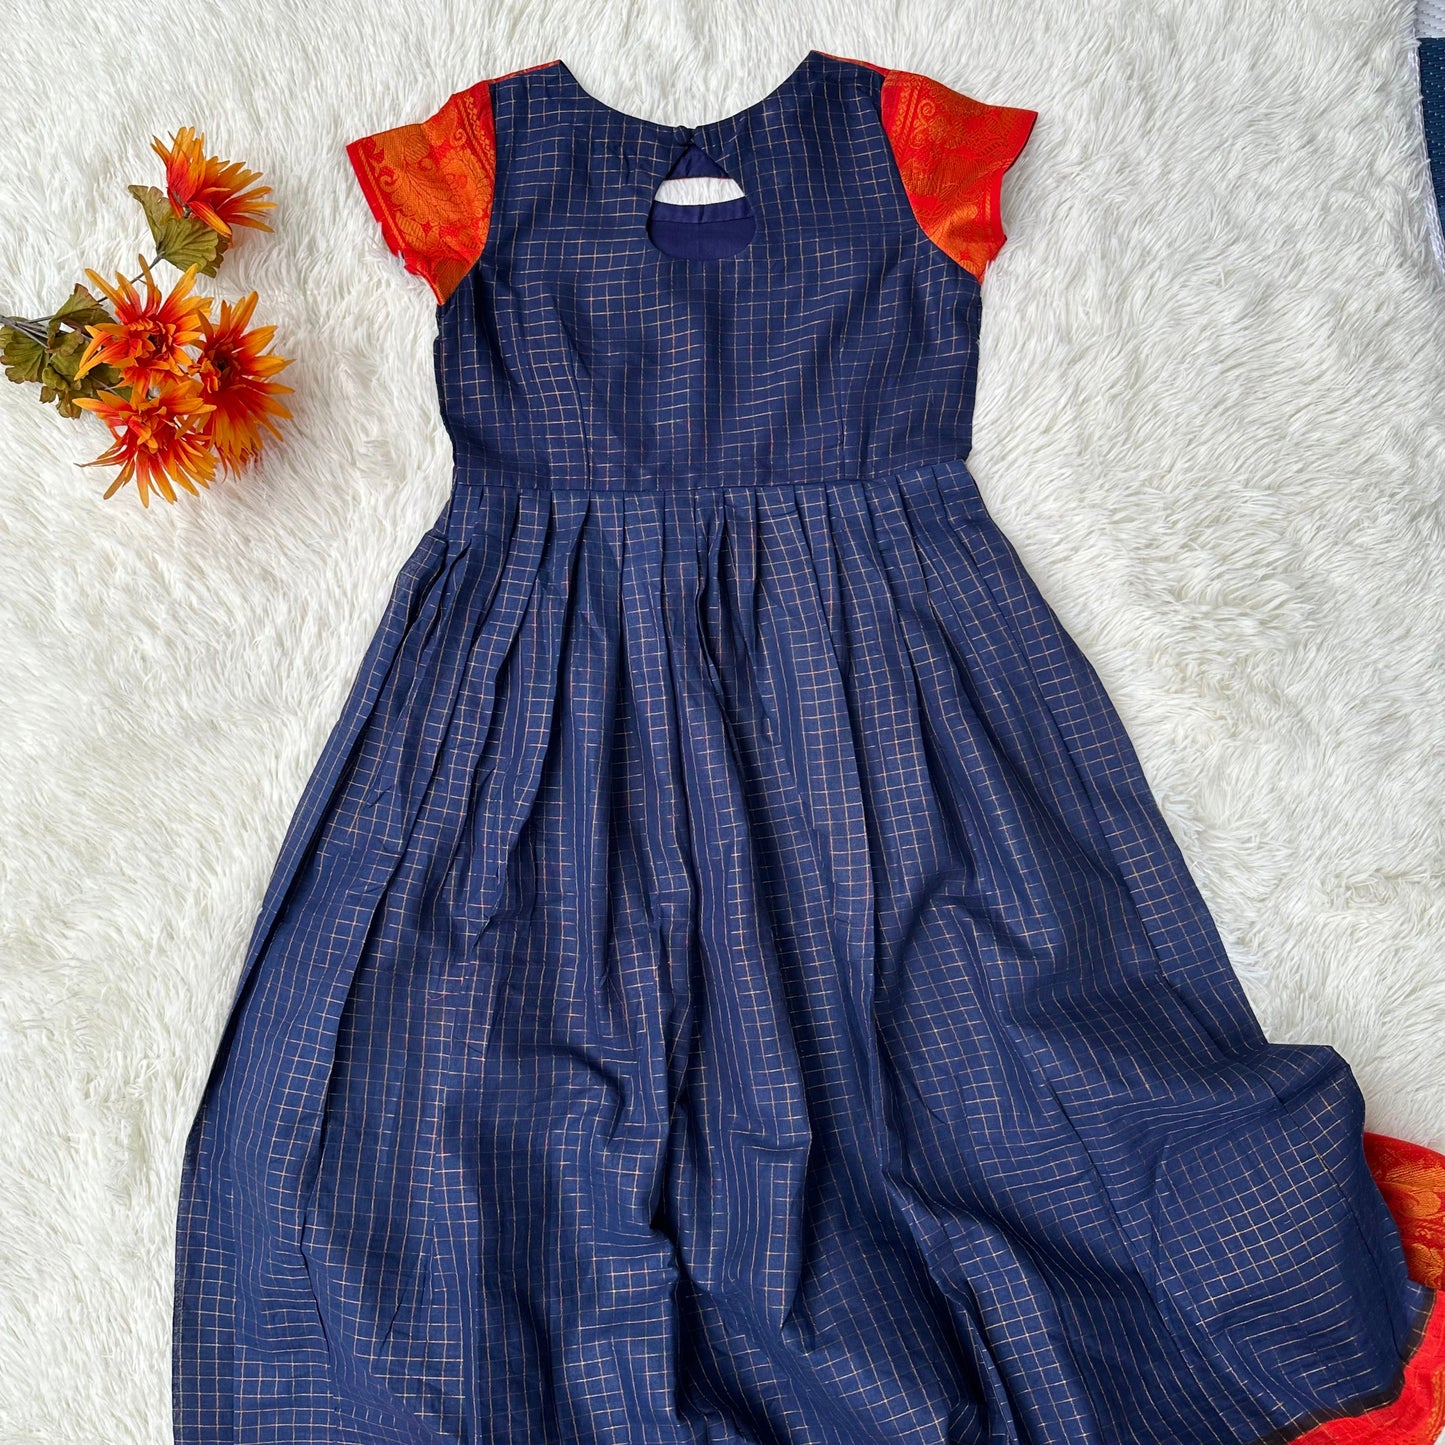 PRE-ORDER: Chic Elegance: Navy Blue and Red Sungudi Frock